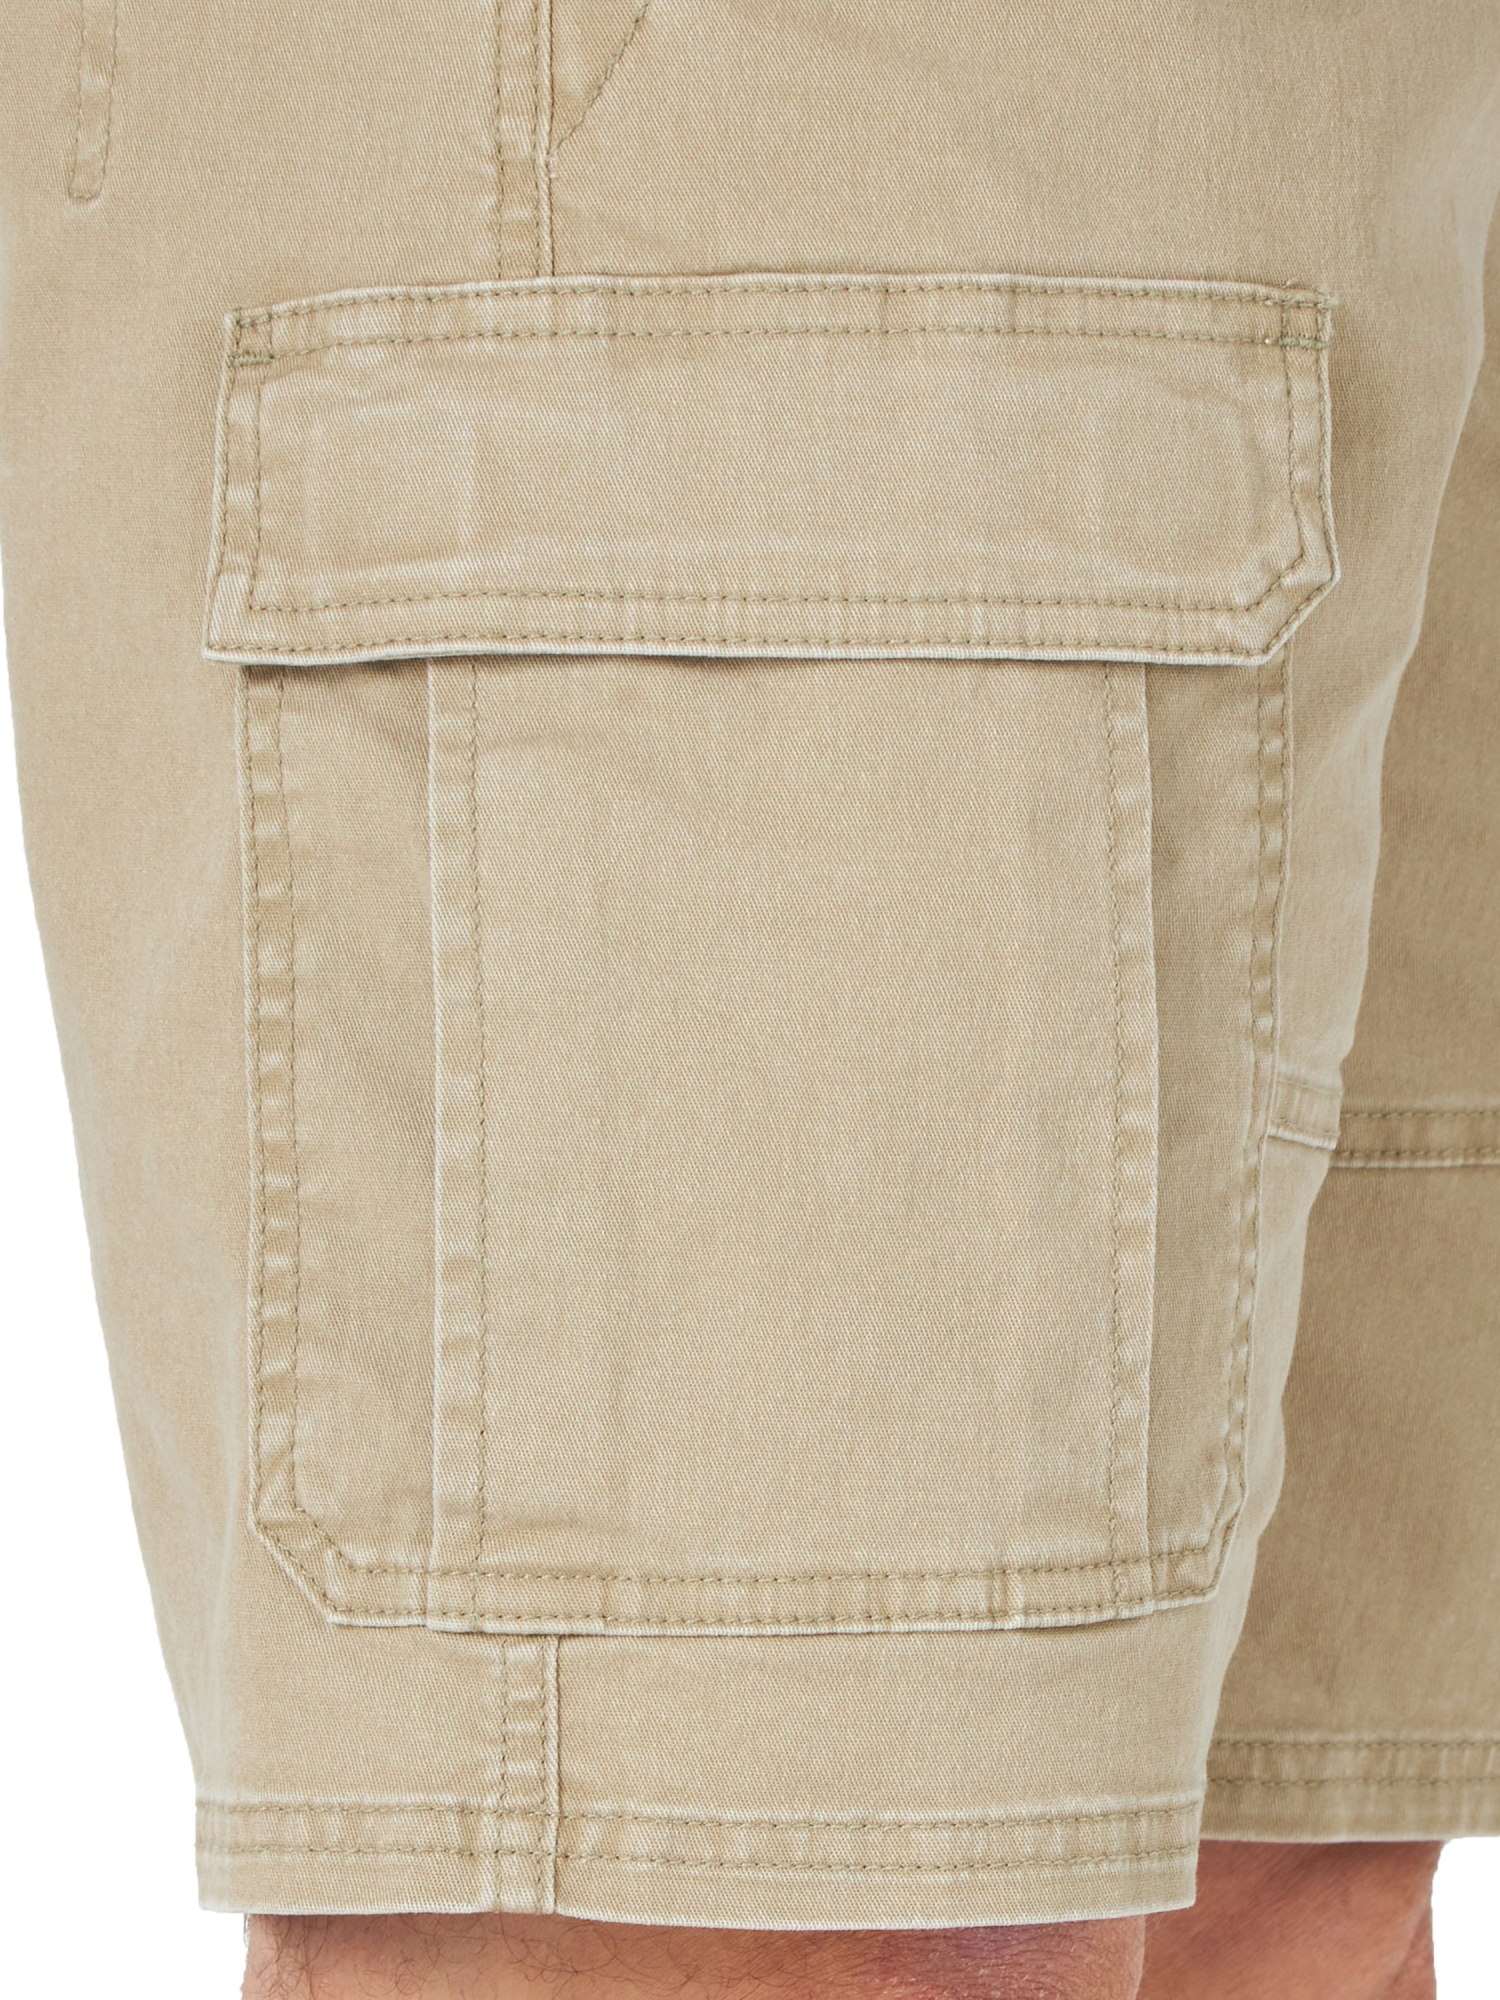 Wrangler Men's and Big Men's 10" Relaxed Fit Cargo Shorts With Stretch - image 5 of 8